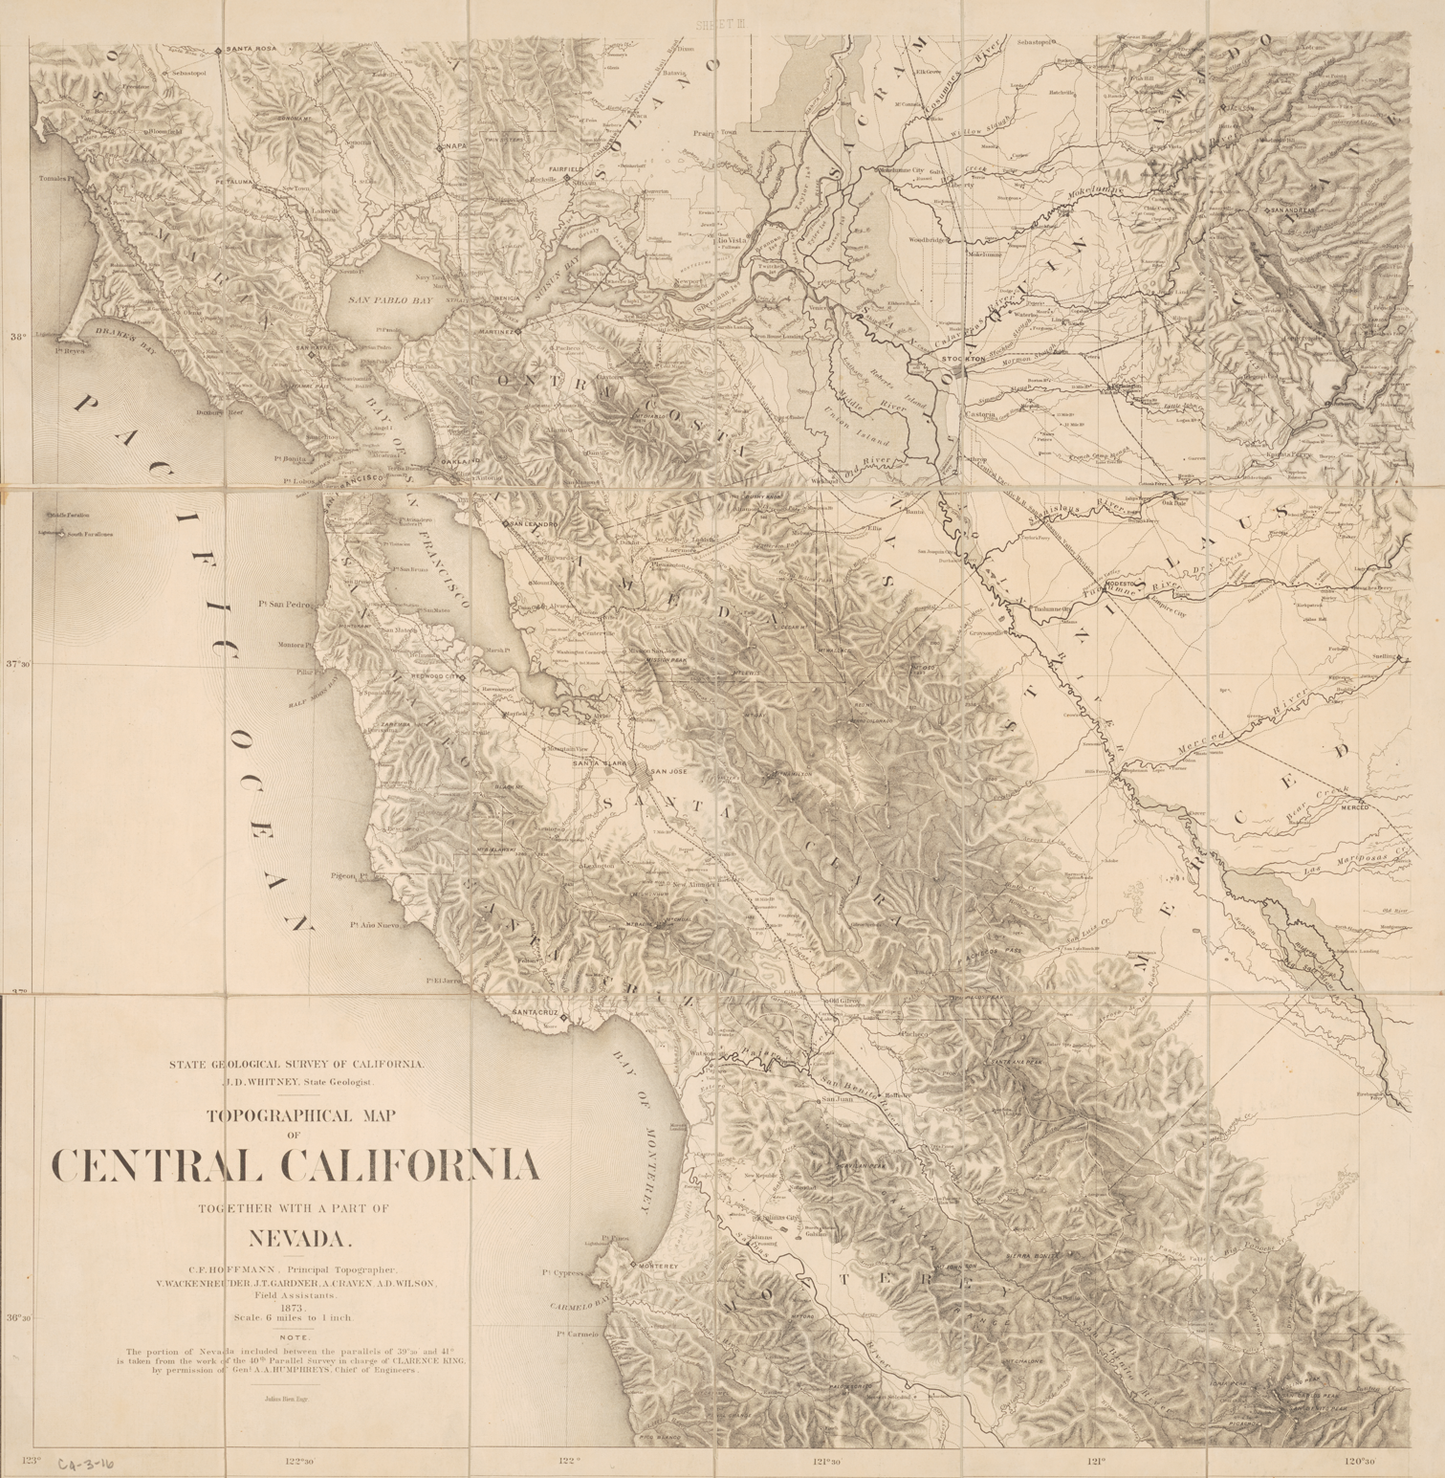 1873 Topographical Map of Central California